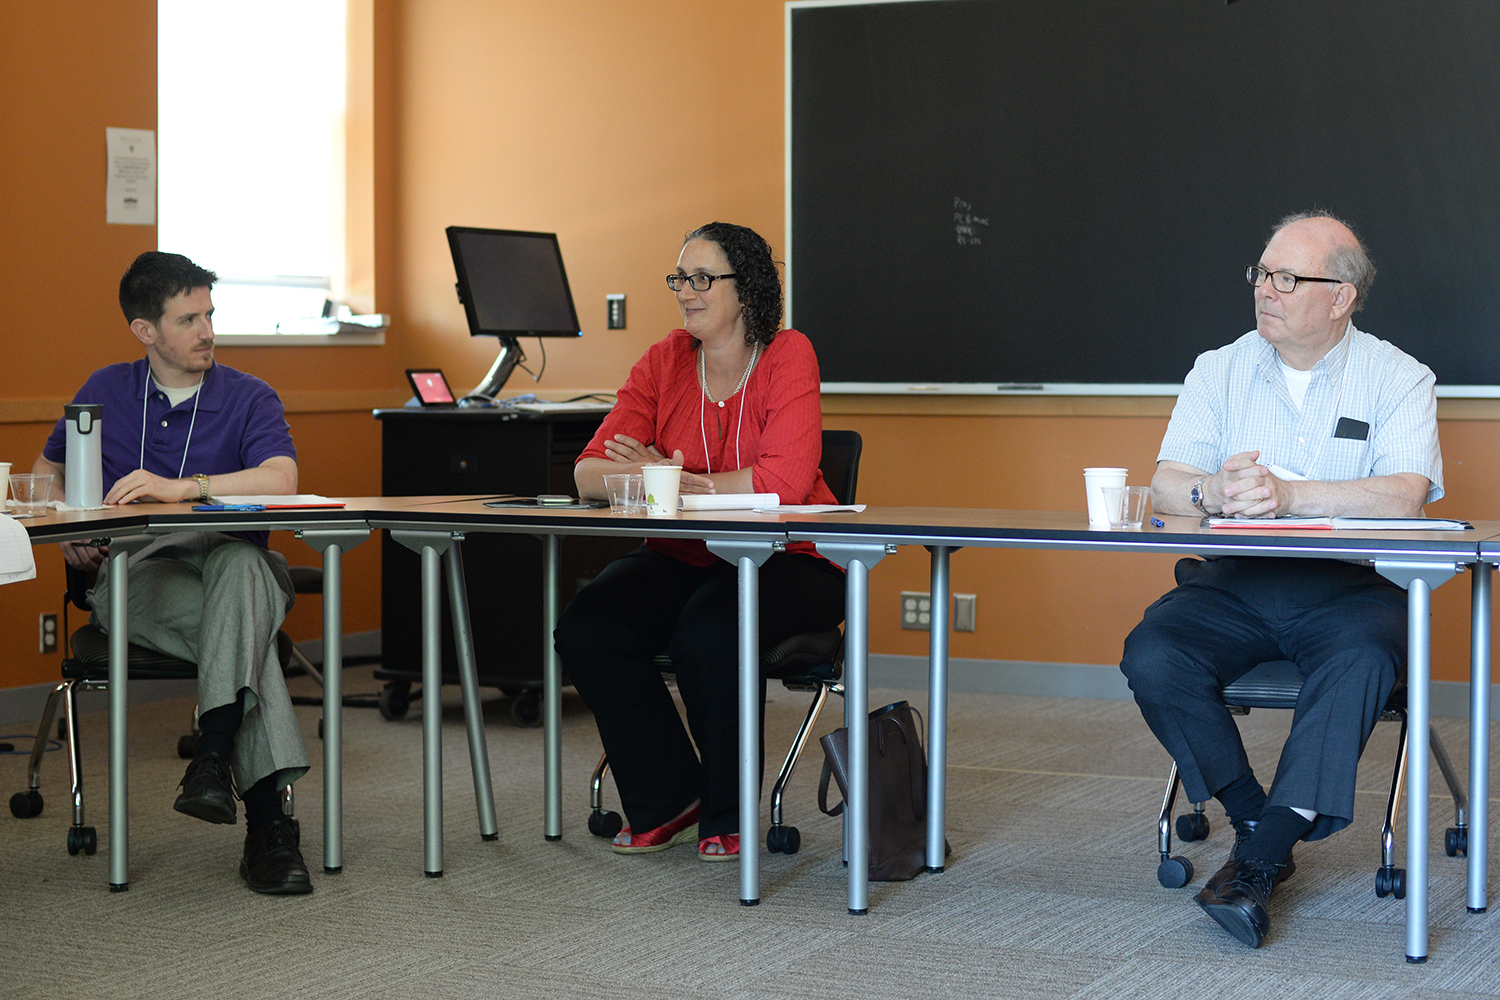 Conference participants also discussed extra-curricular teaching and advising, project based teaching, course titles and materials, teaching finance at a liberal arts college versus a business school, among other topics. 